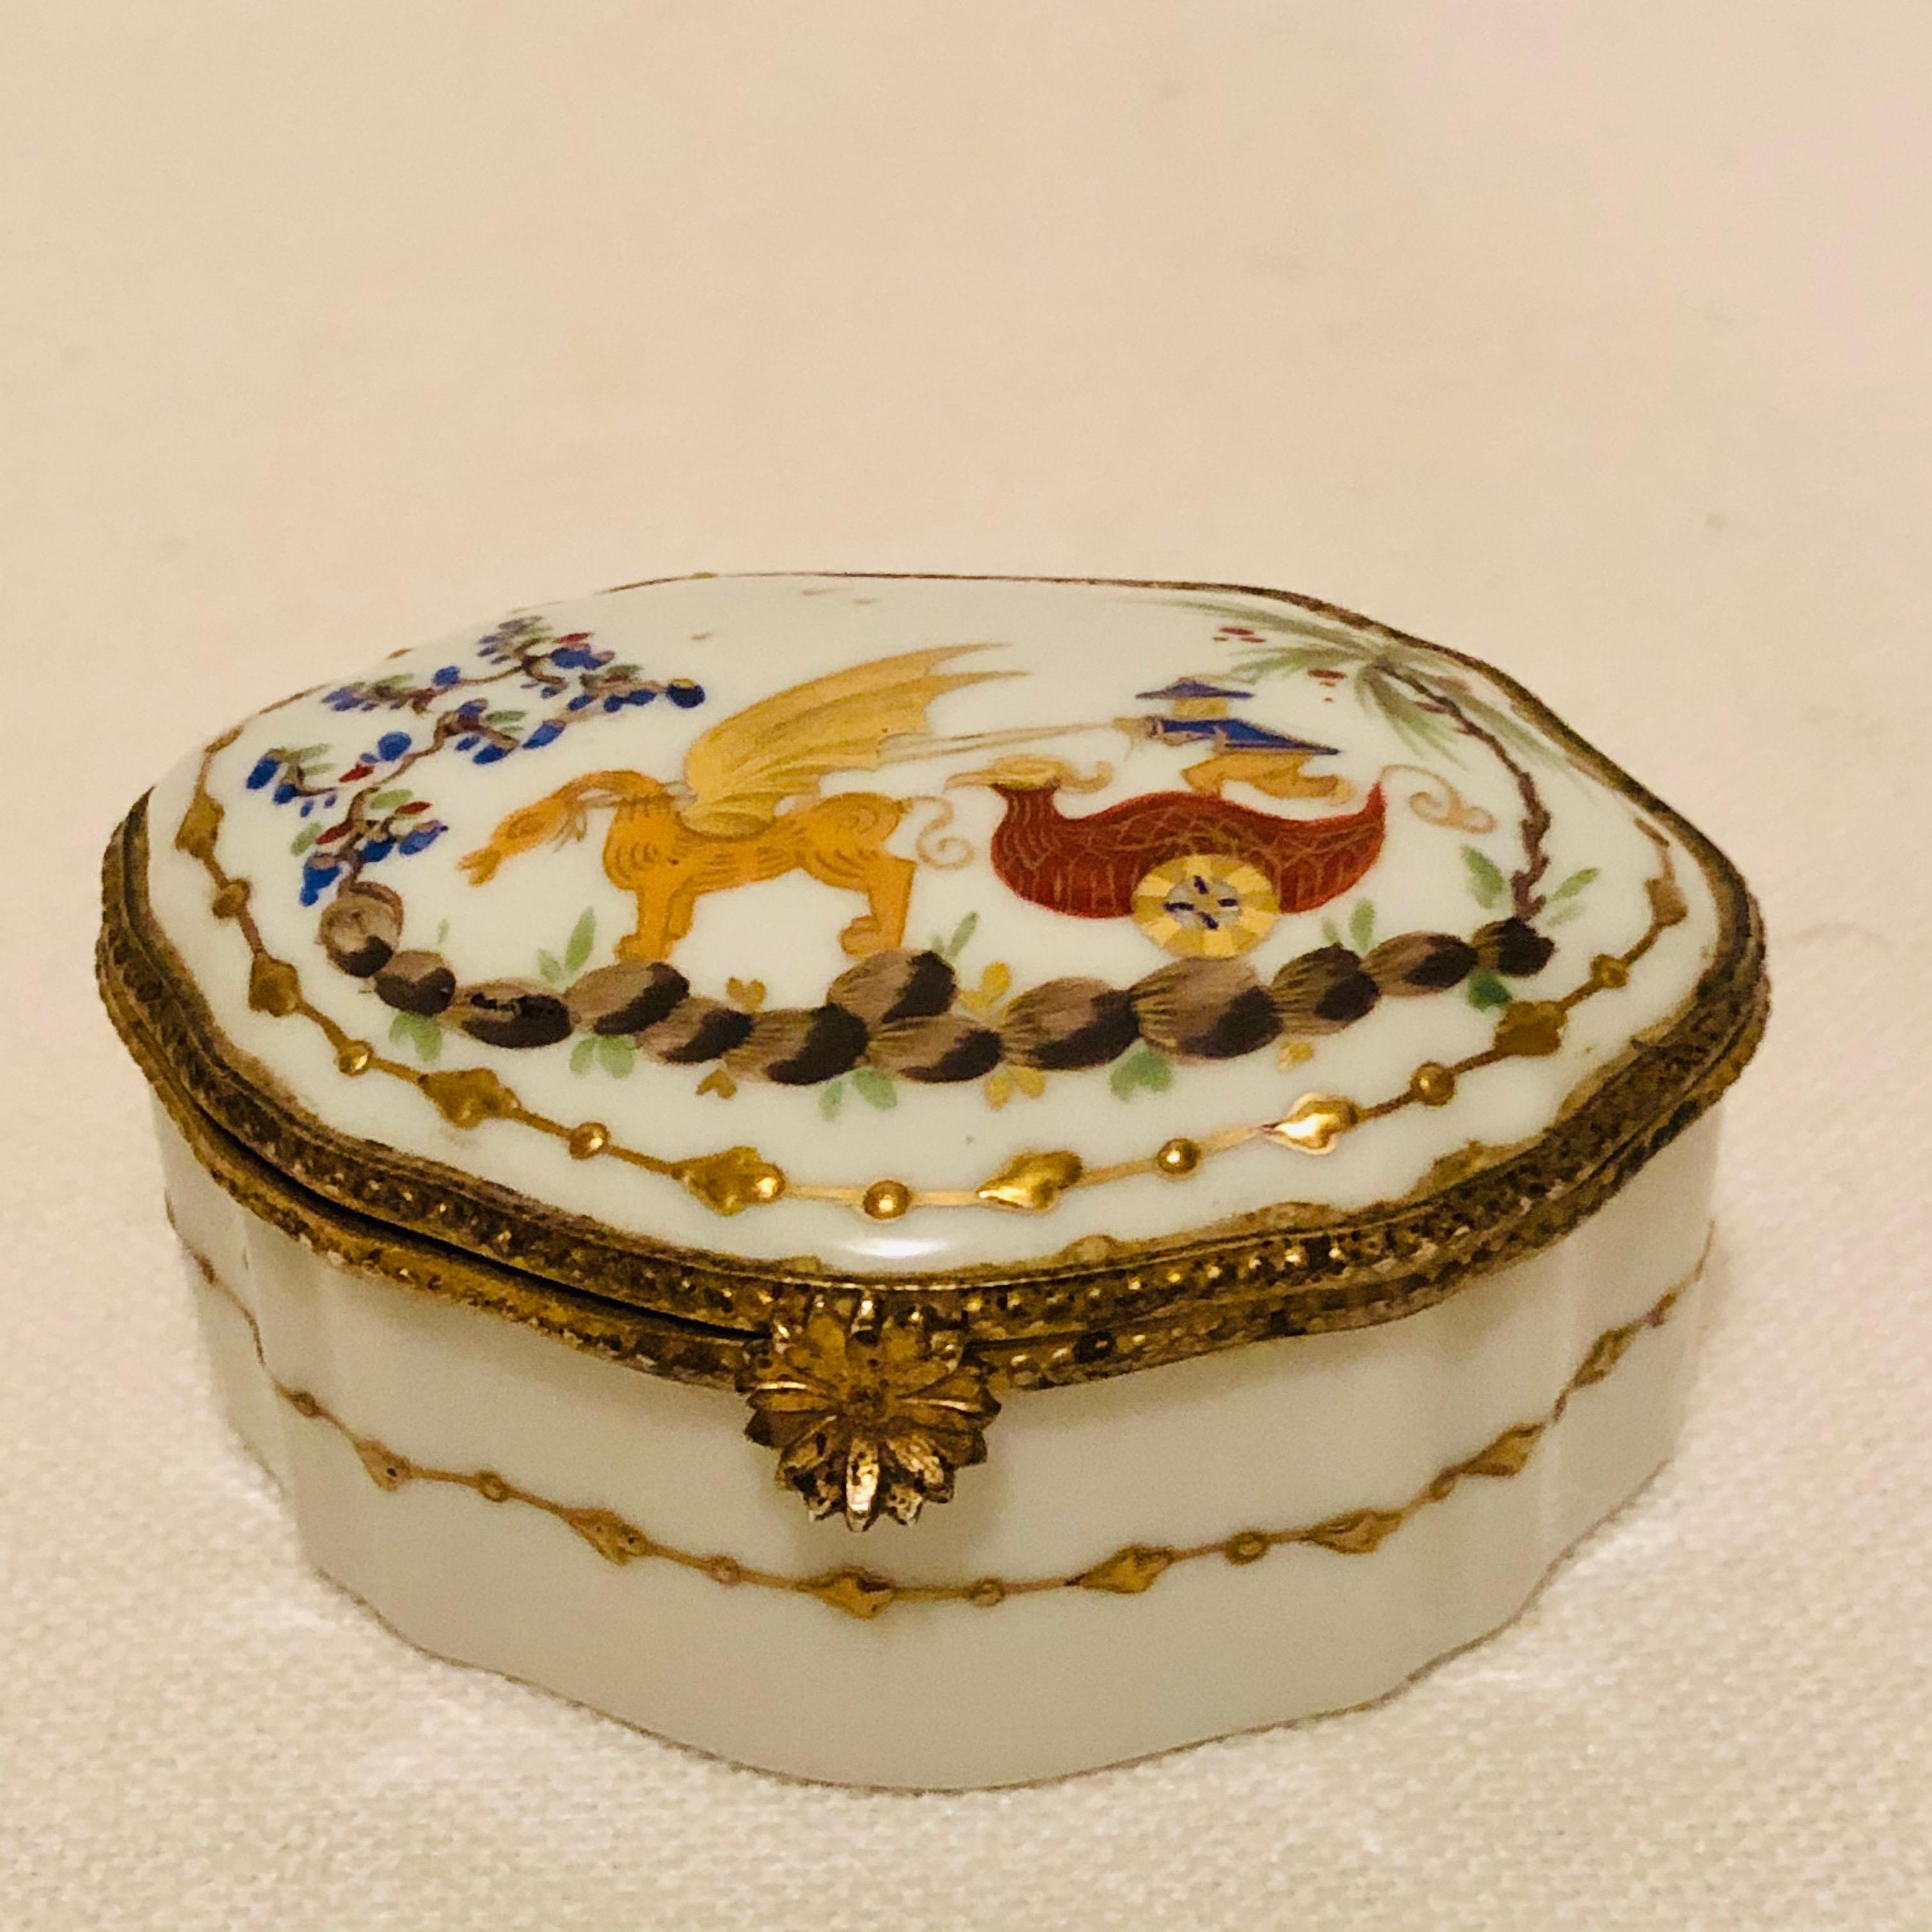 This is a wonderful Le Tallec porcelain box hand-painted with a whimsical chinoiserie scene surrounded by raised gold accents. This would be an enchanting addition to any porcelain box collector or any collector of Le Tallec porcelain pieces. This